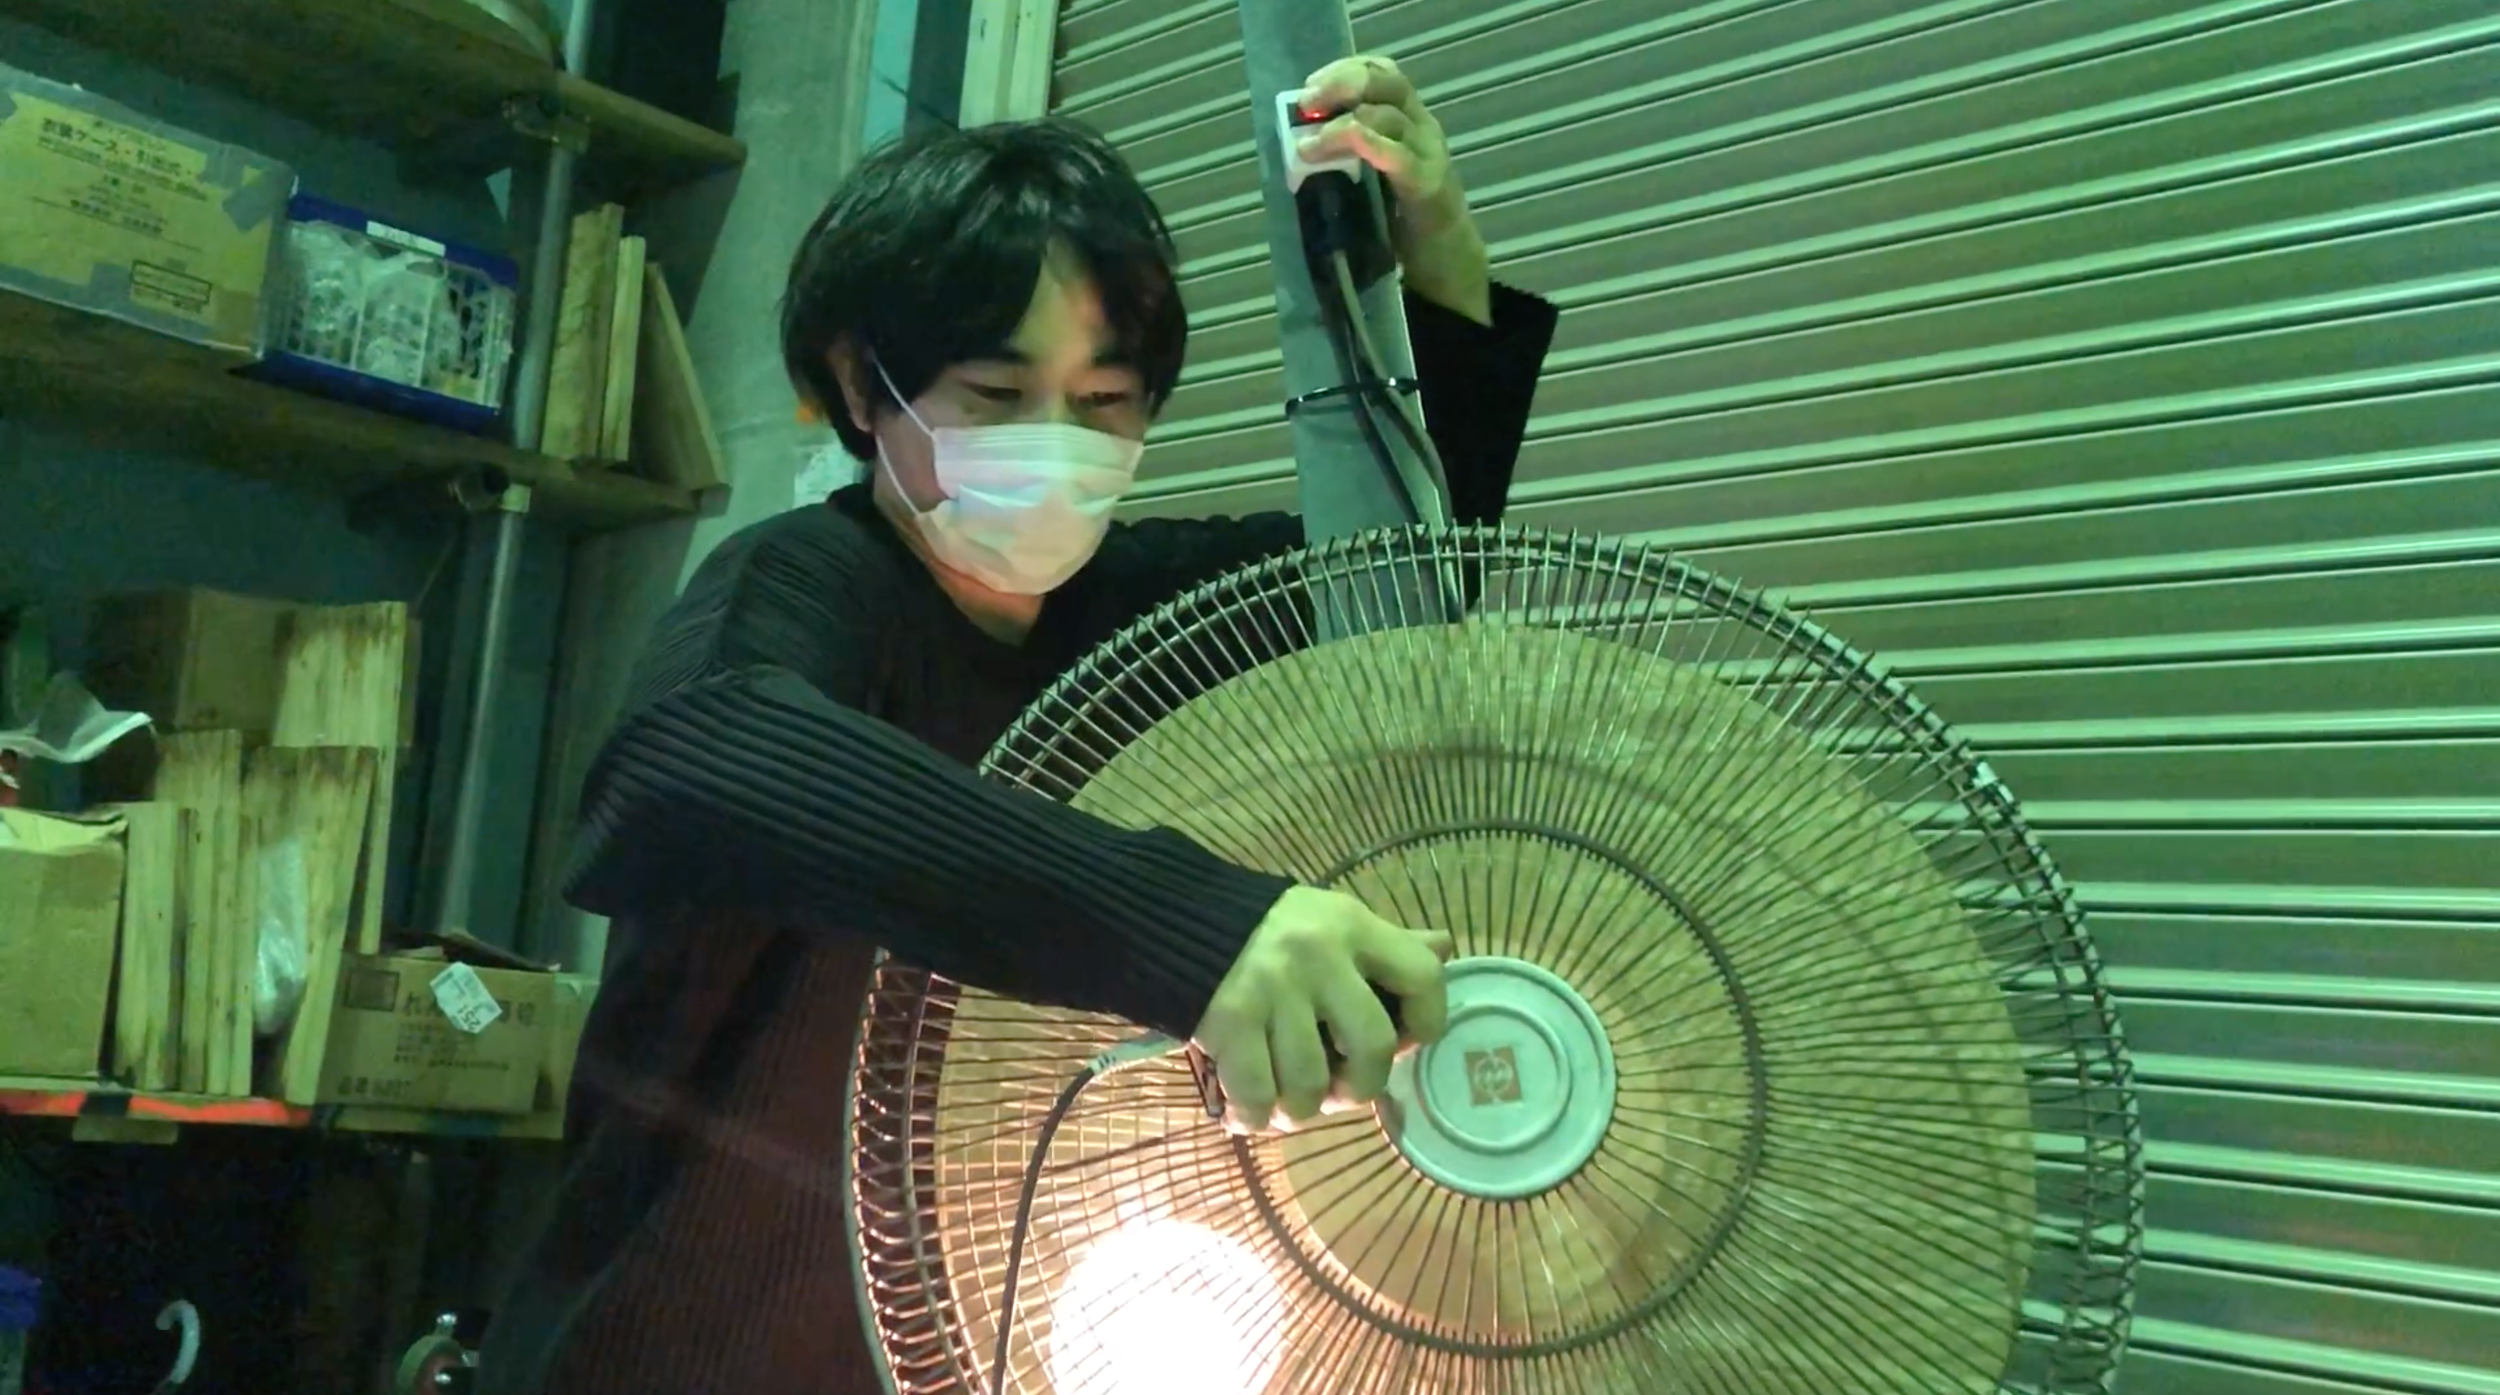 Watch This Guy Create A Bass Instrument Using A Simple Fan